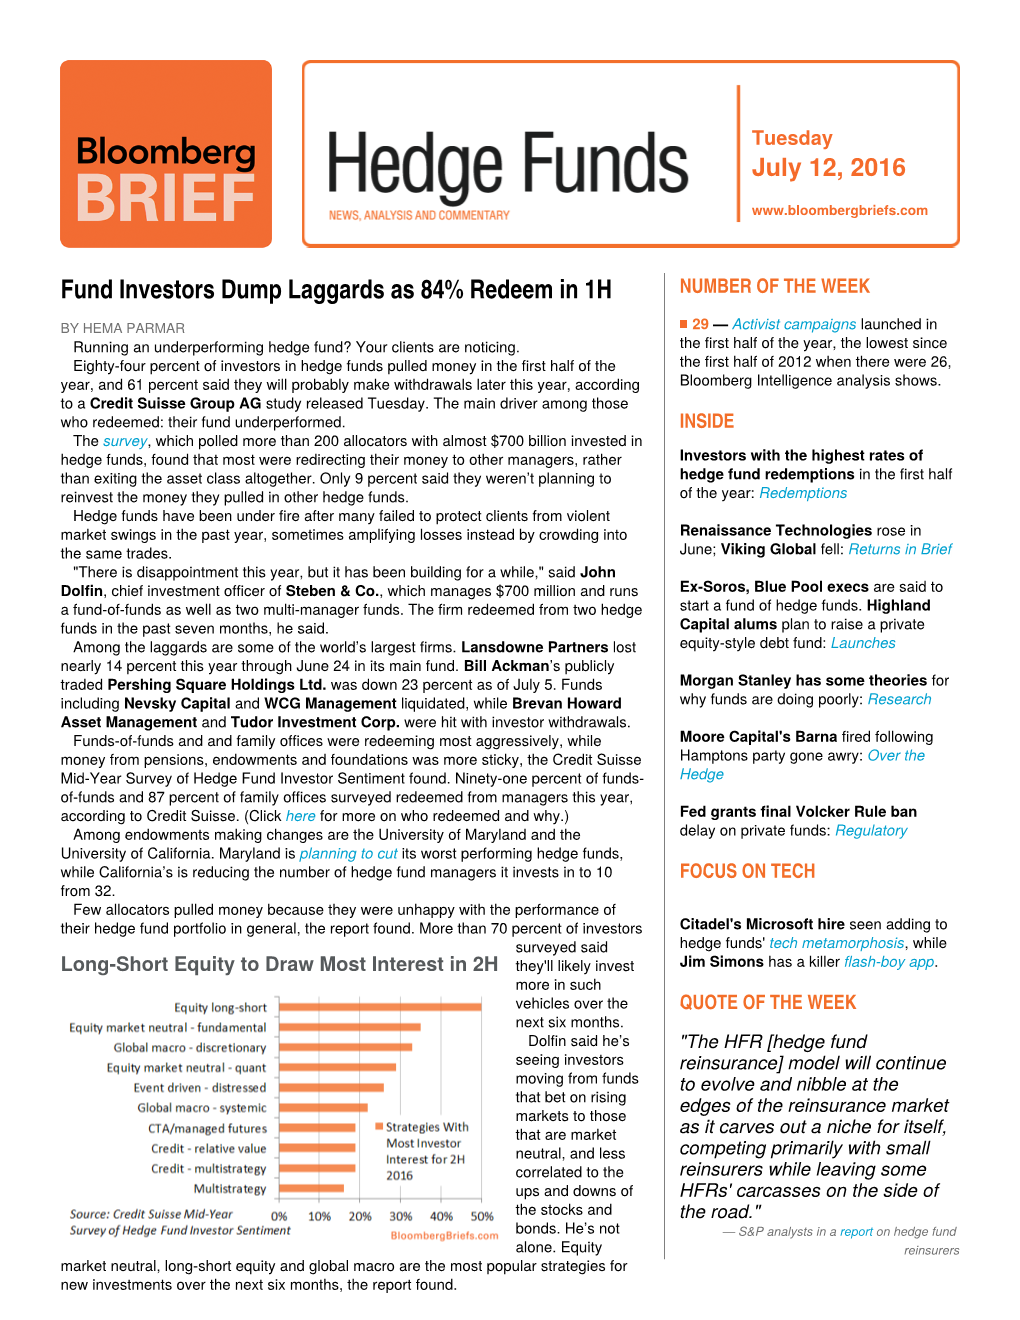 Bloomberg Brief: Hedge Funds